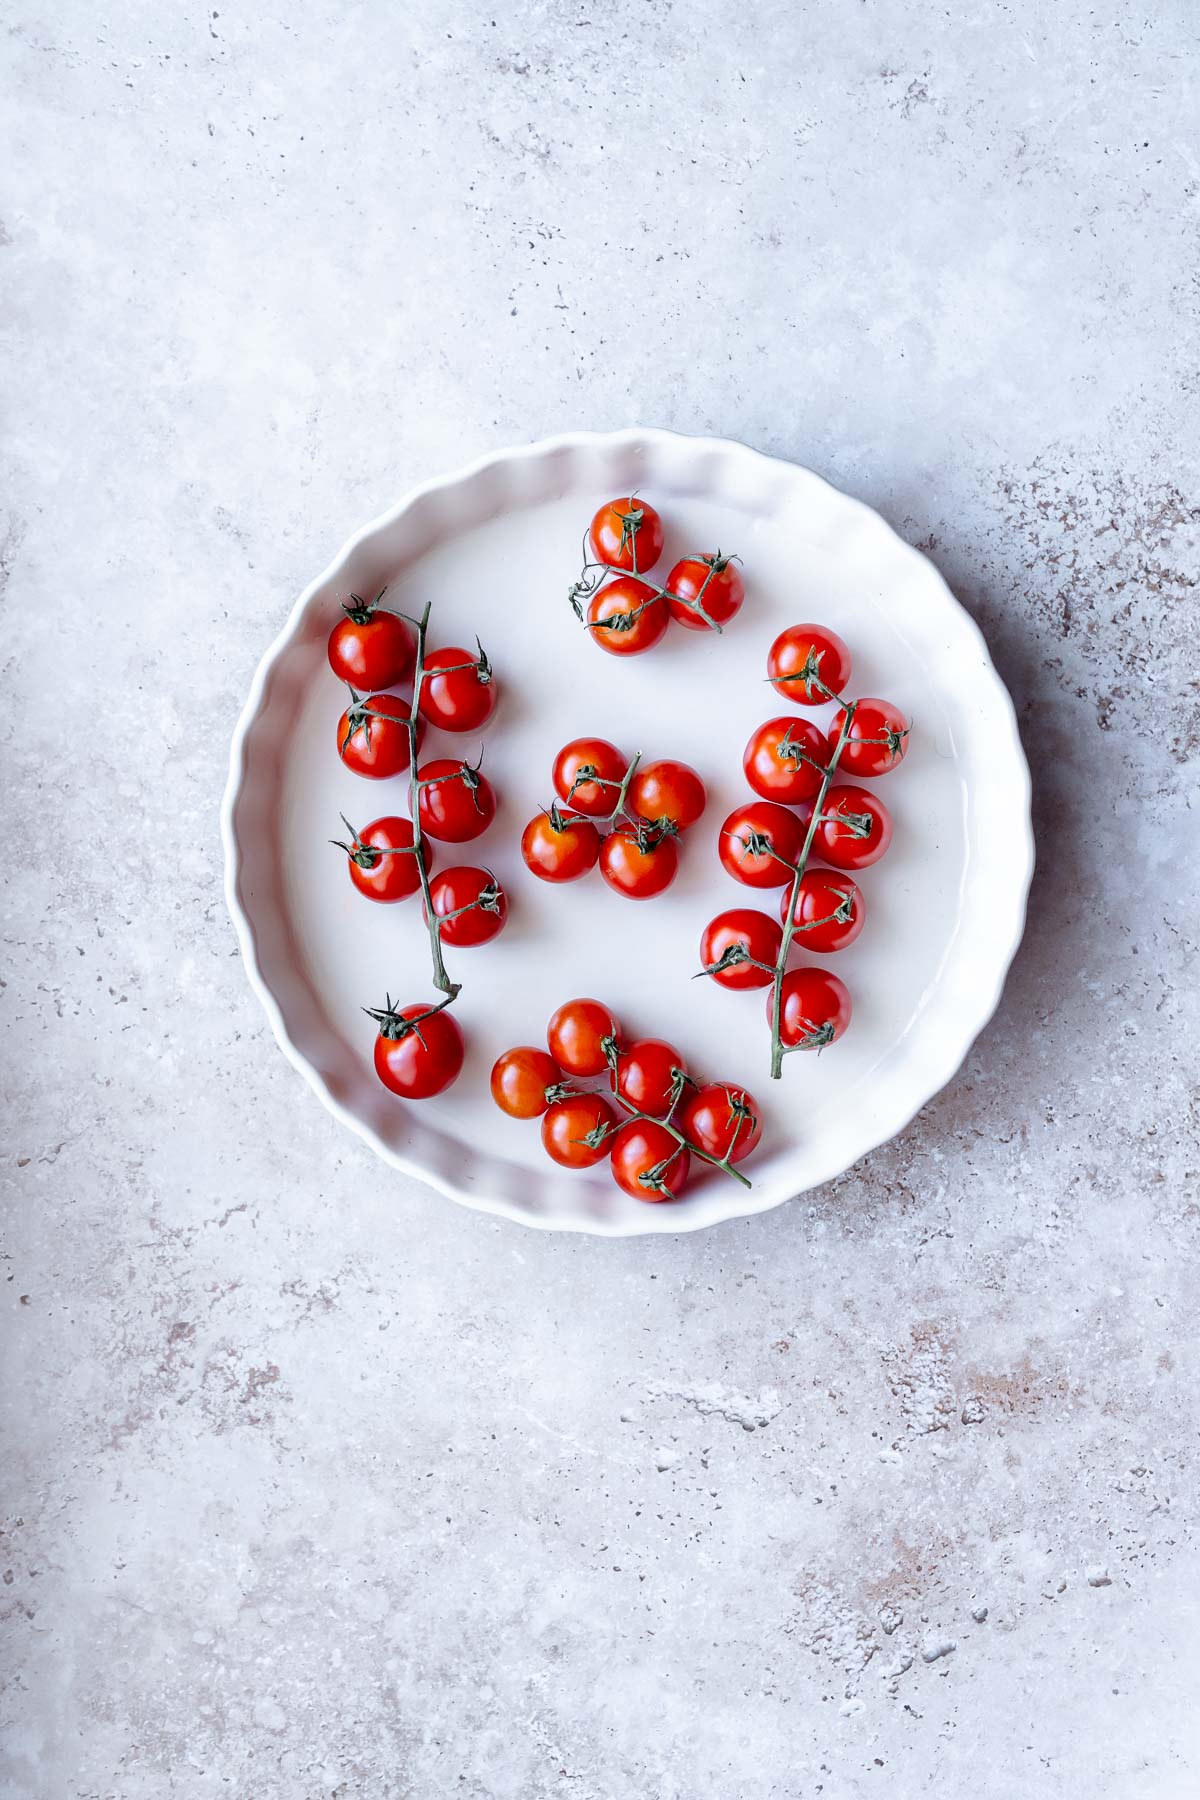 A white dish filled with plump red cherry tomatoes on the vine.